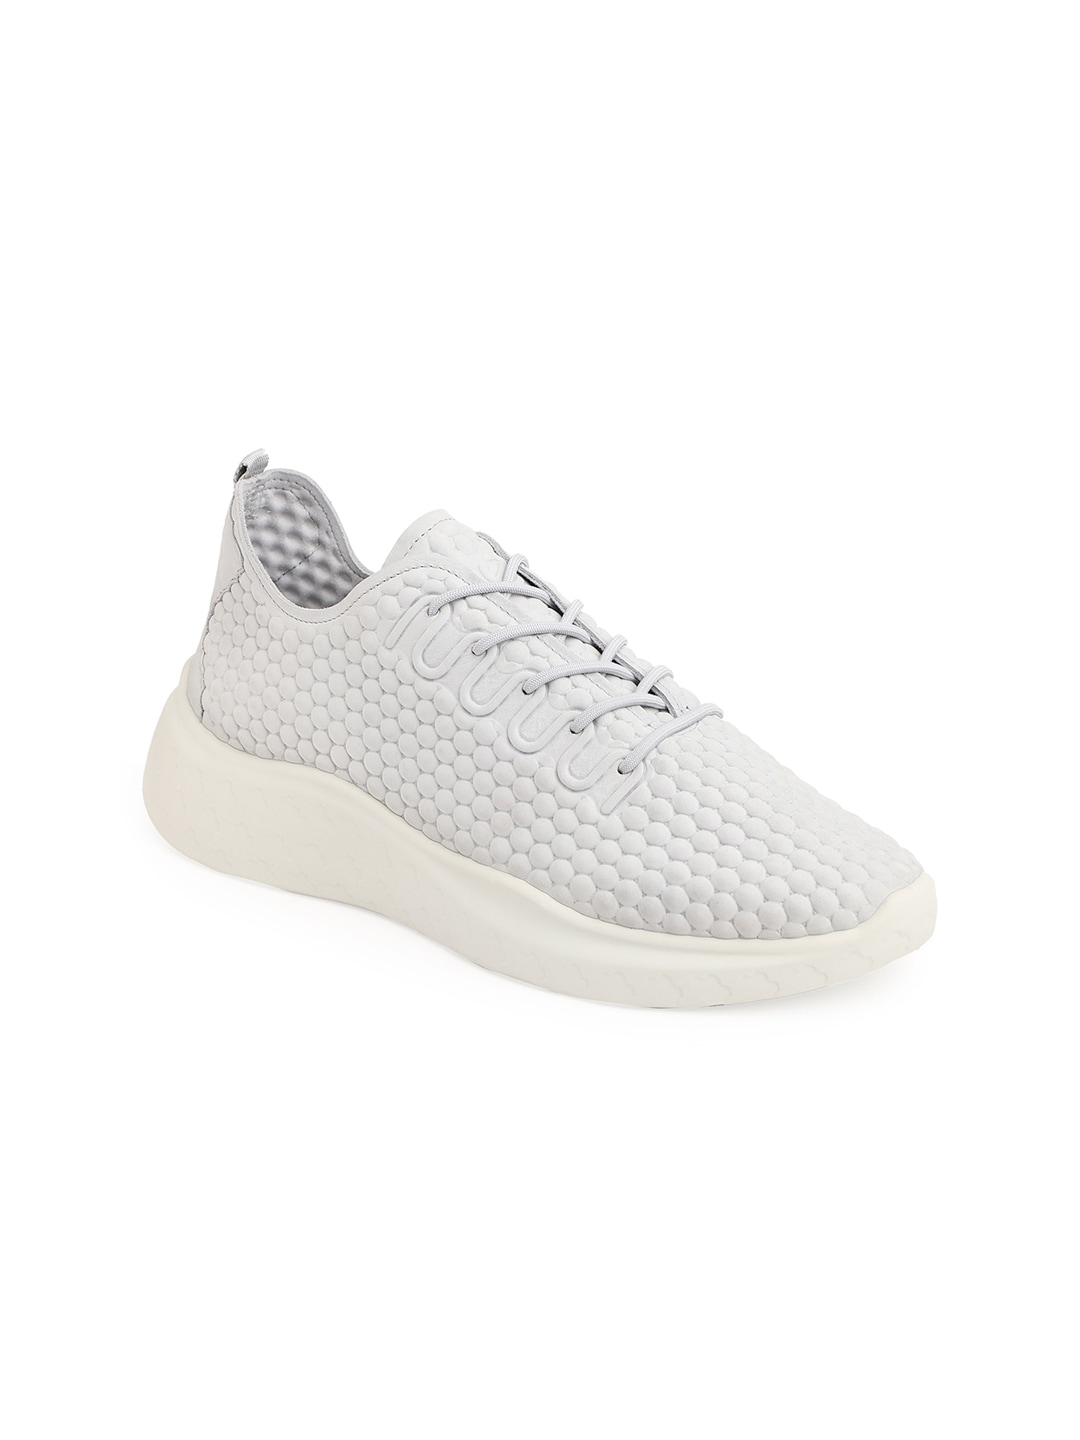 ECCO Women Grey Woven Design Leather Sneakers Price in India